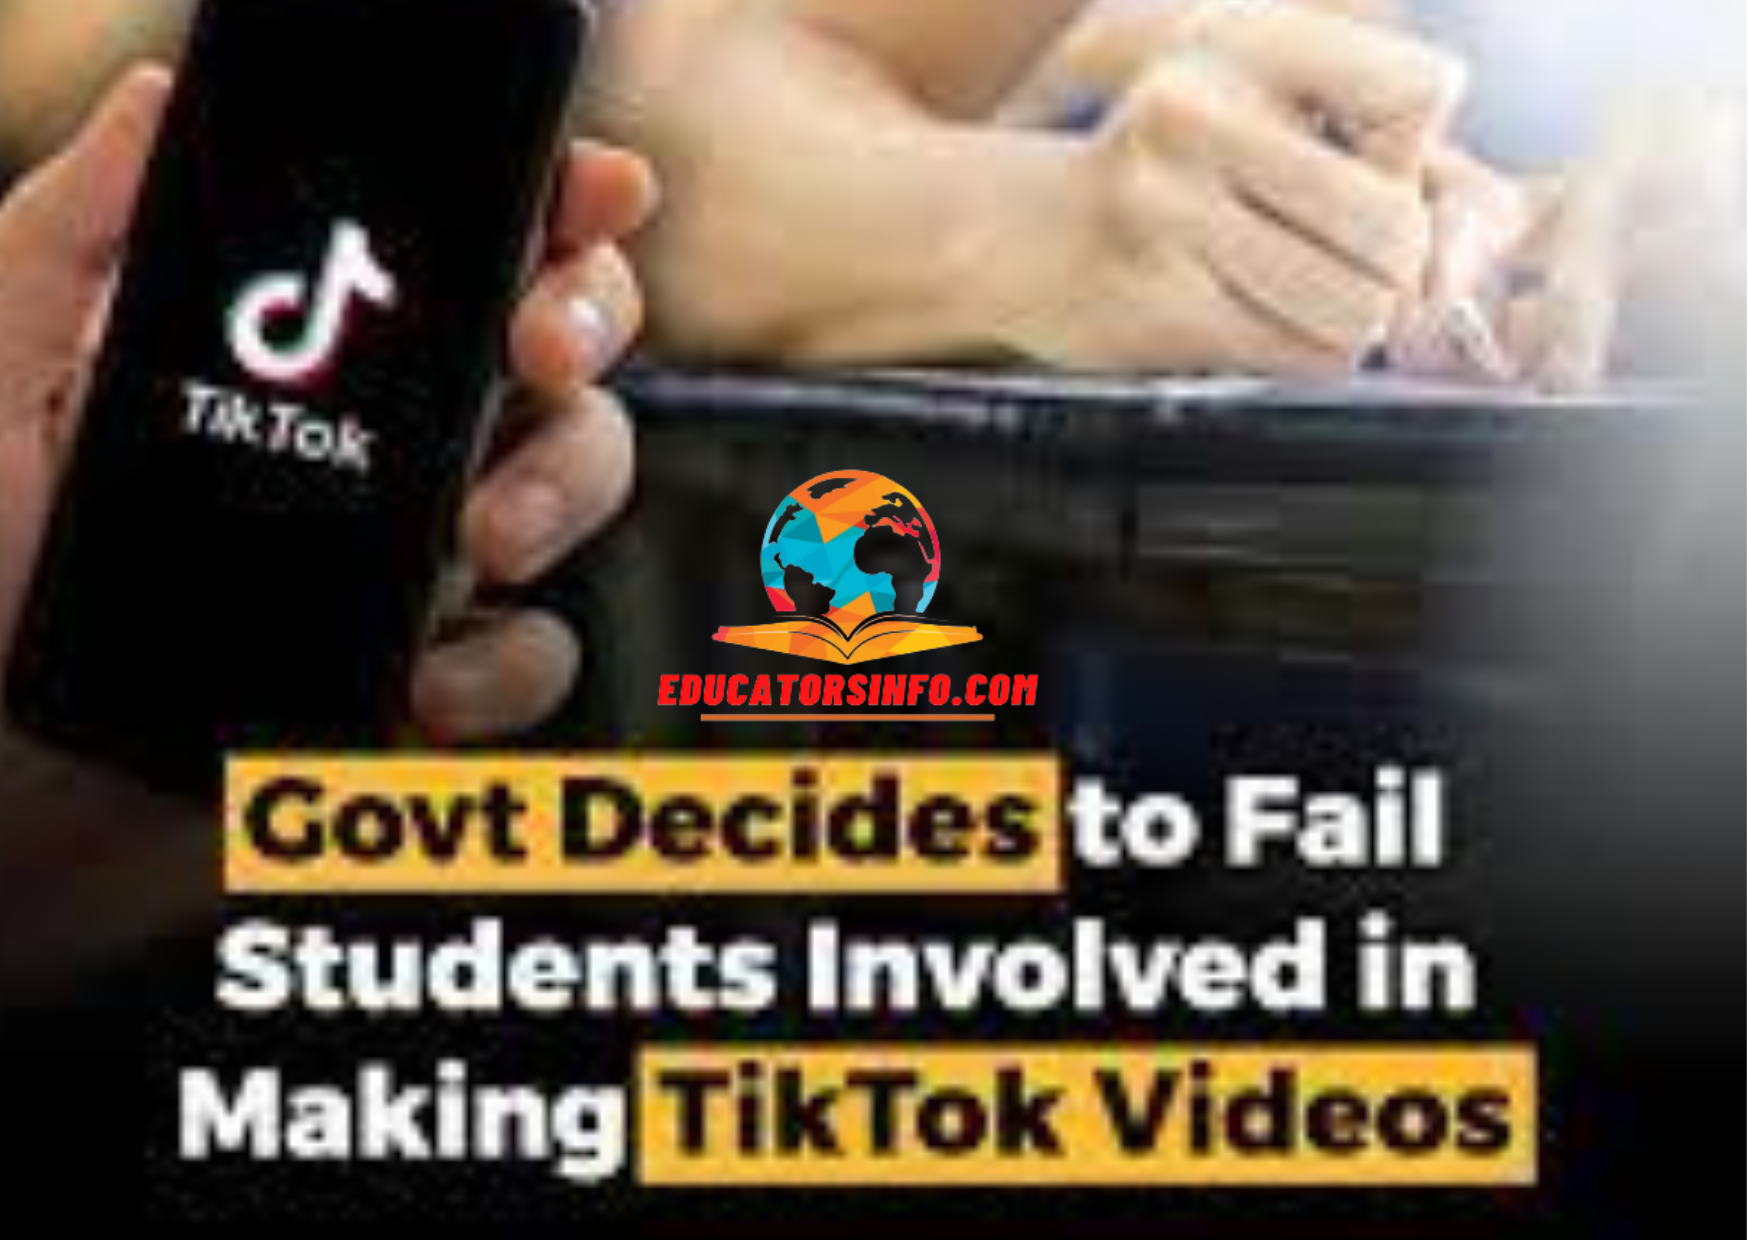 Govt Decides to Fail Students Involved in Making TikTok Videos